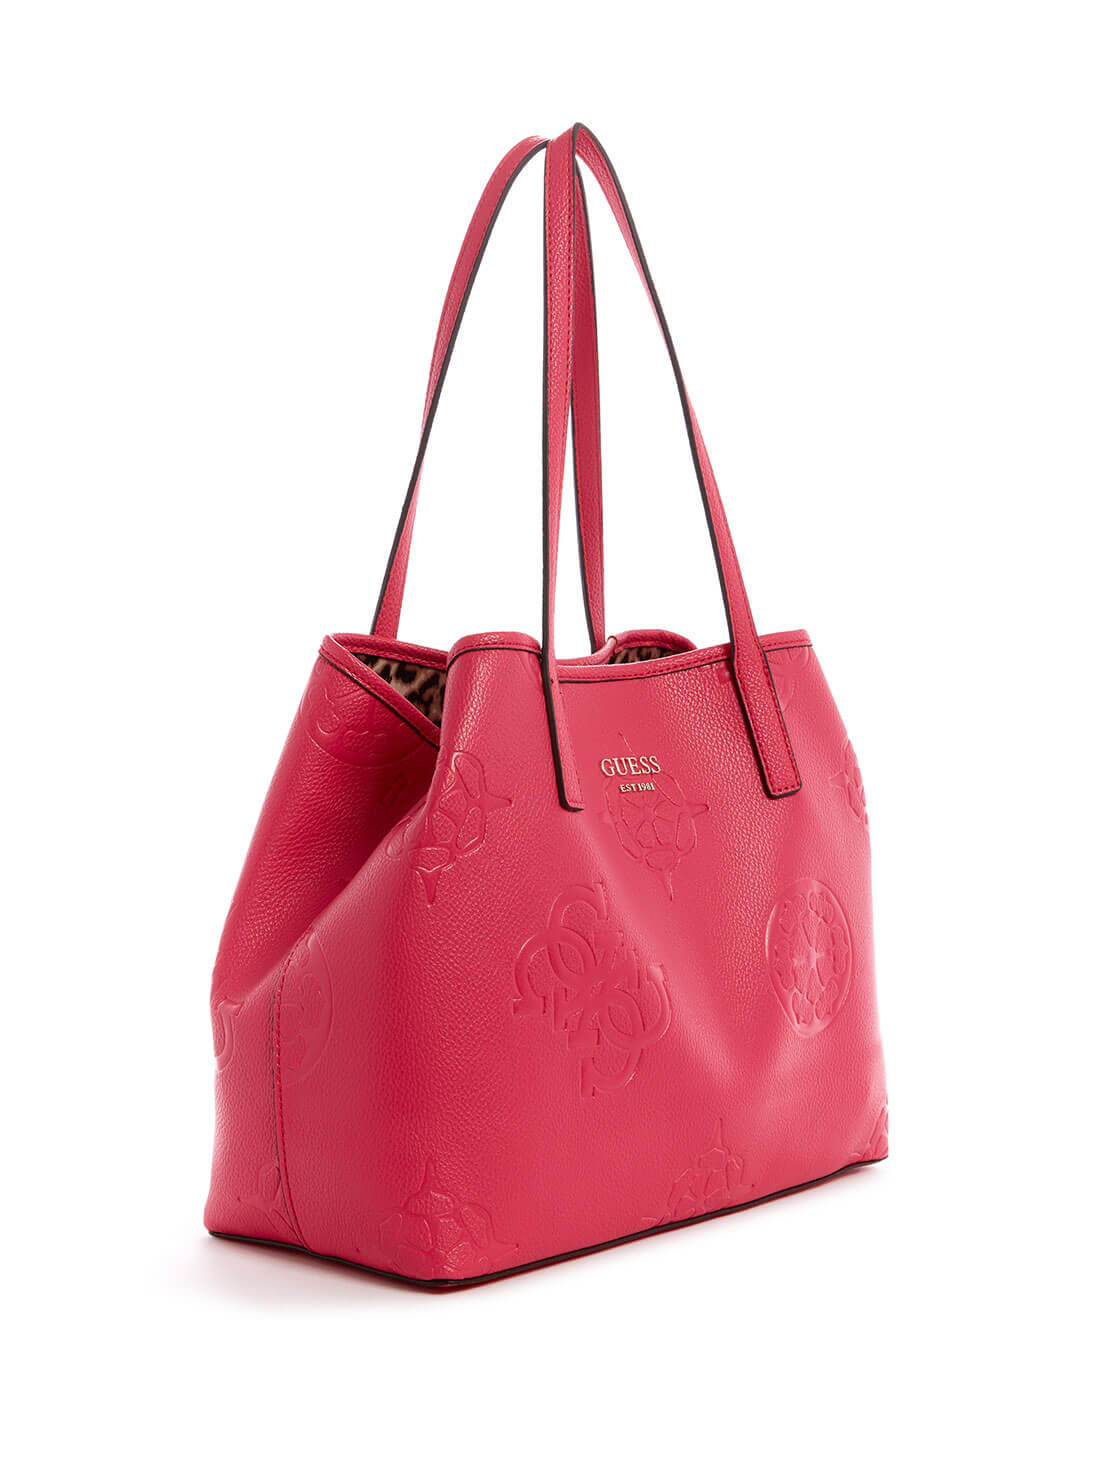 GUESS Women's Pink Vikky Tote Bag DP699523 Front Side View